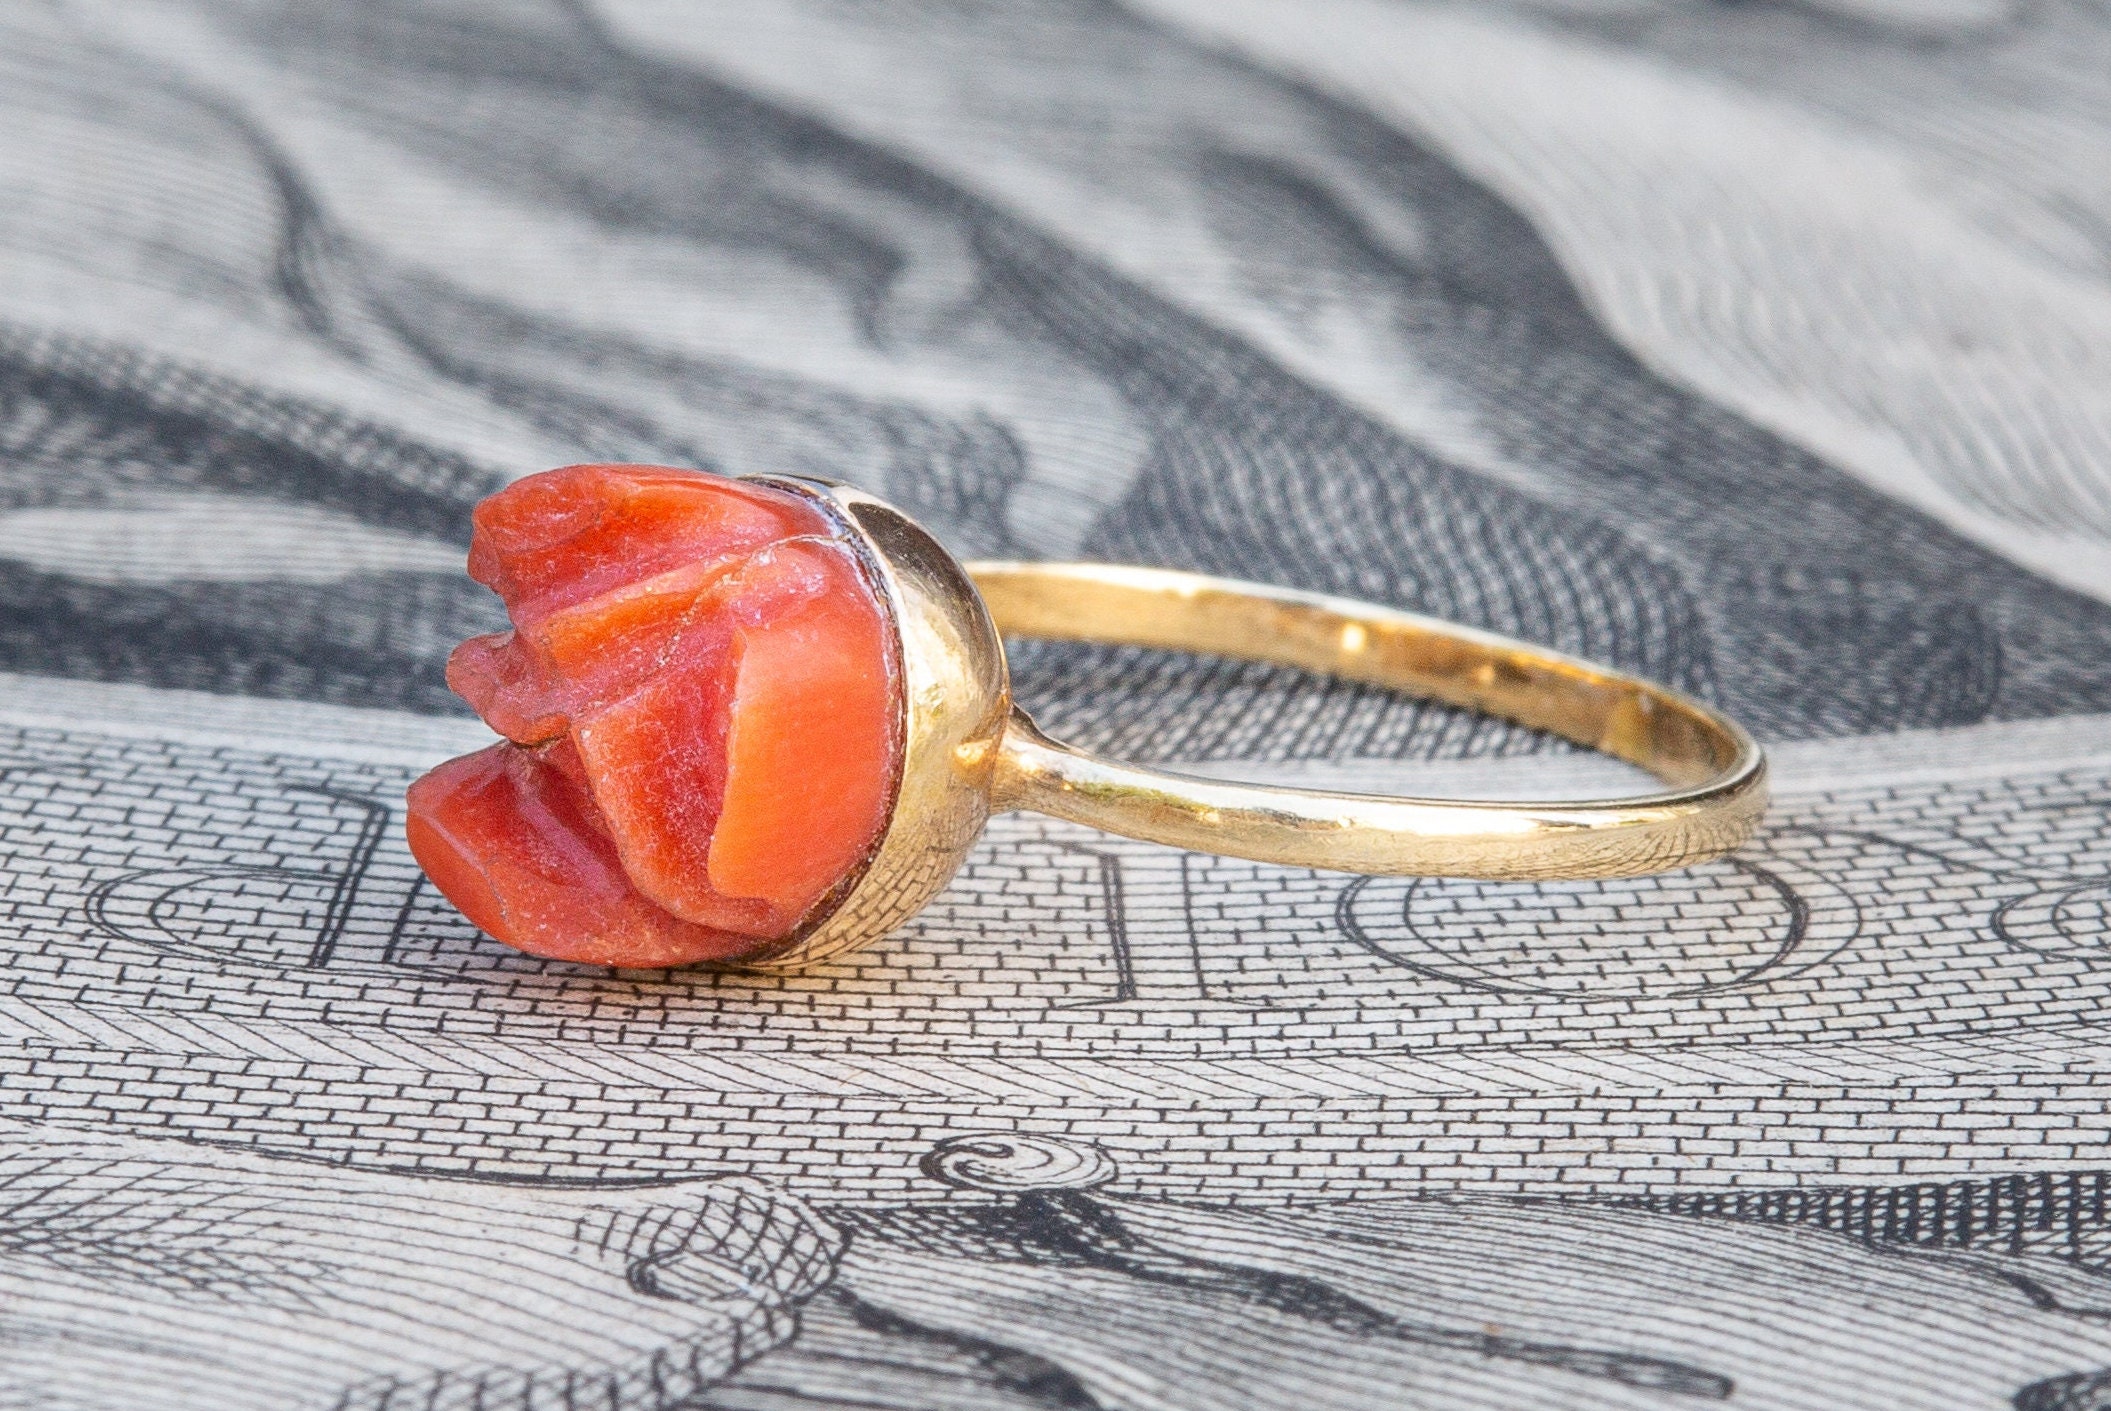 Red Coral 925 Sterling Silver, 18K Yellow Gold, 18K Rose Gold Filled Ring,  Handmade in India, Gift Jewelry, Gemstone Ring11.5 / 18k Yellow Gold Filled  | Gold filled ring, 18k rose gold,